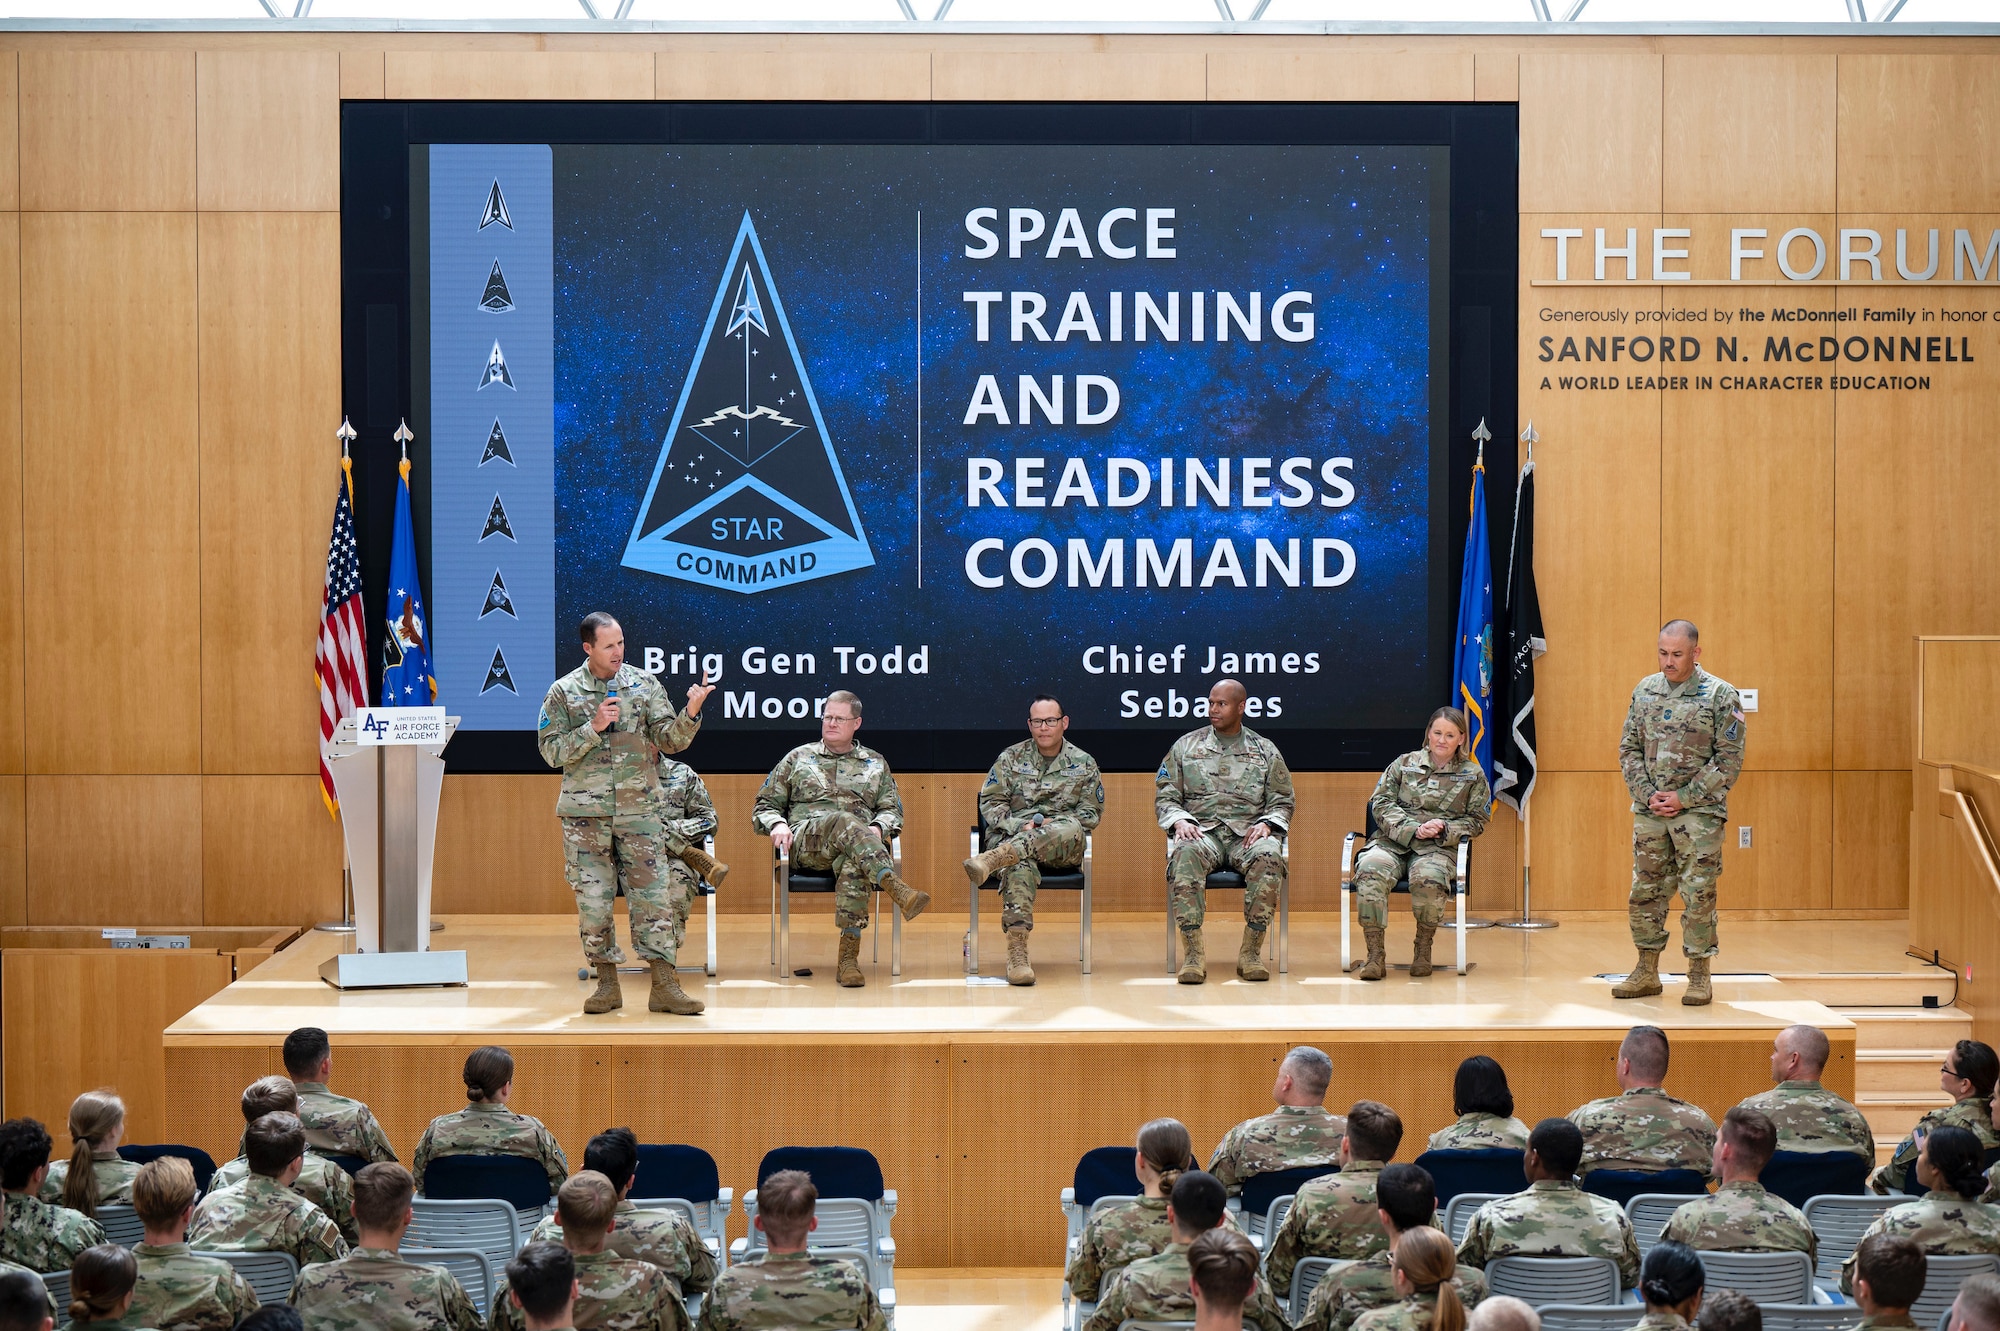 Senior leaders from Space Training and Readiness Command speak with aspirational space cadets during a conference at the U.S. Air Force Academy